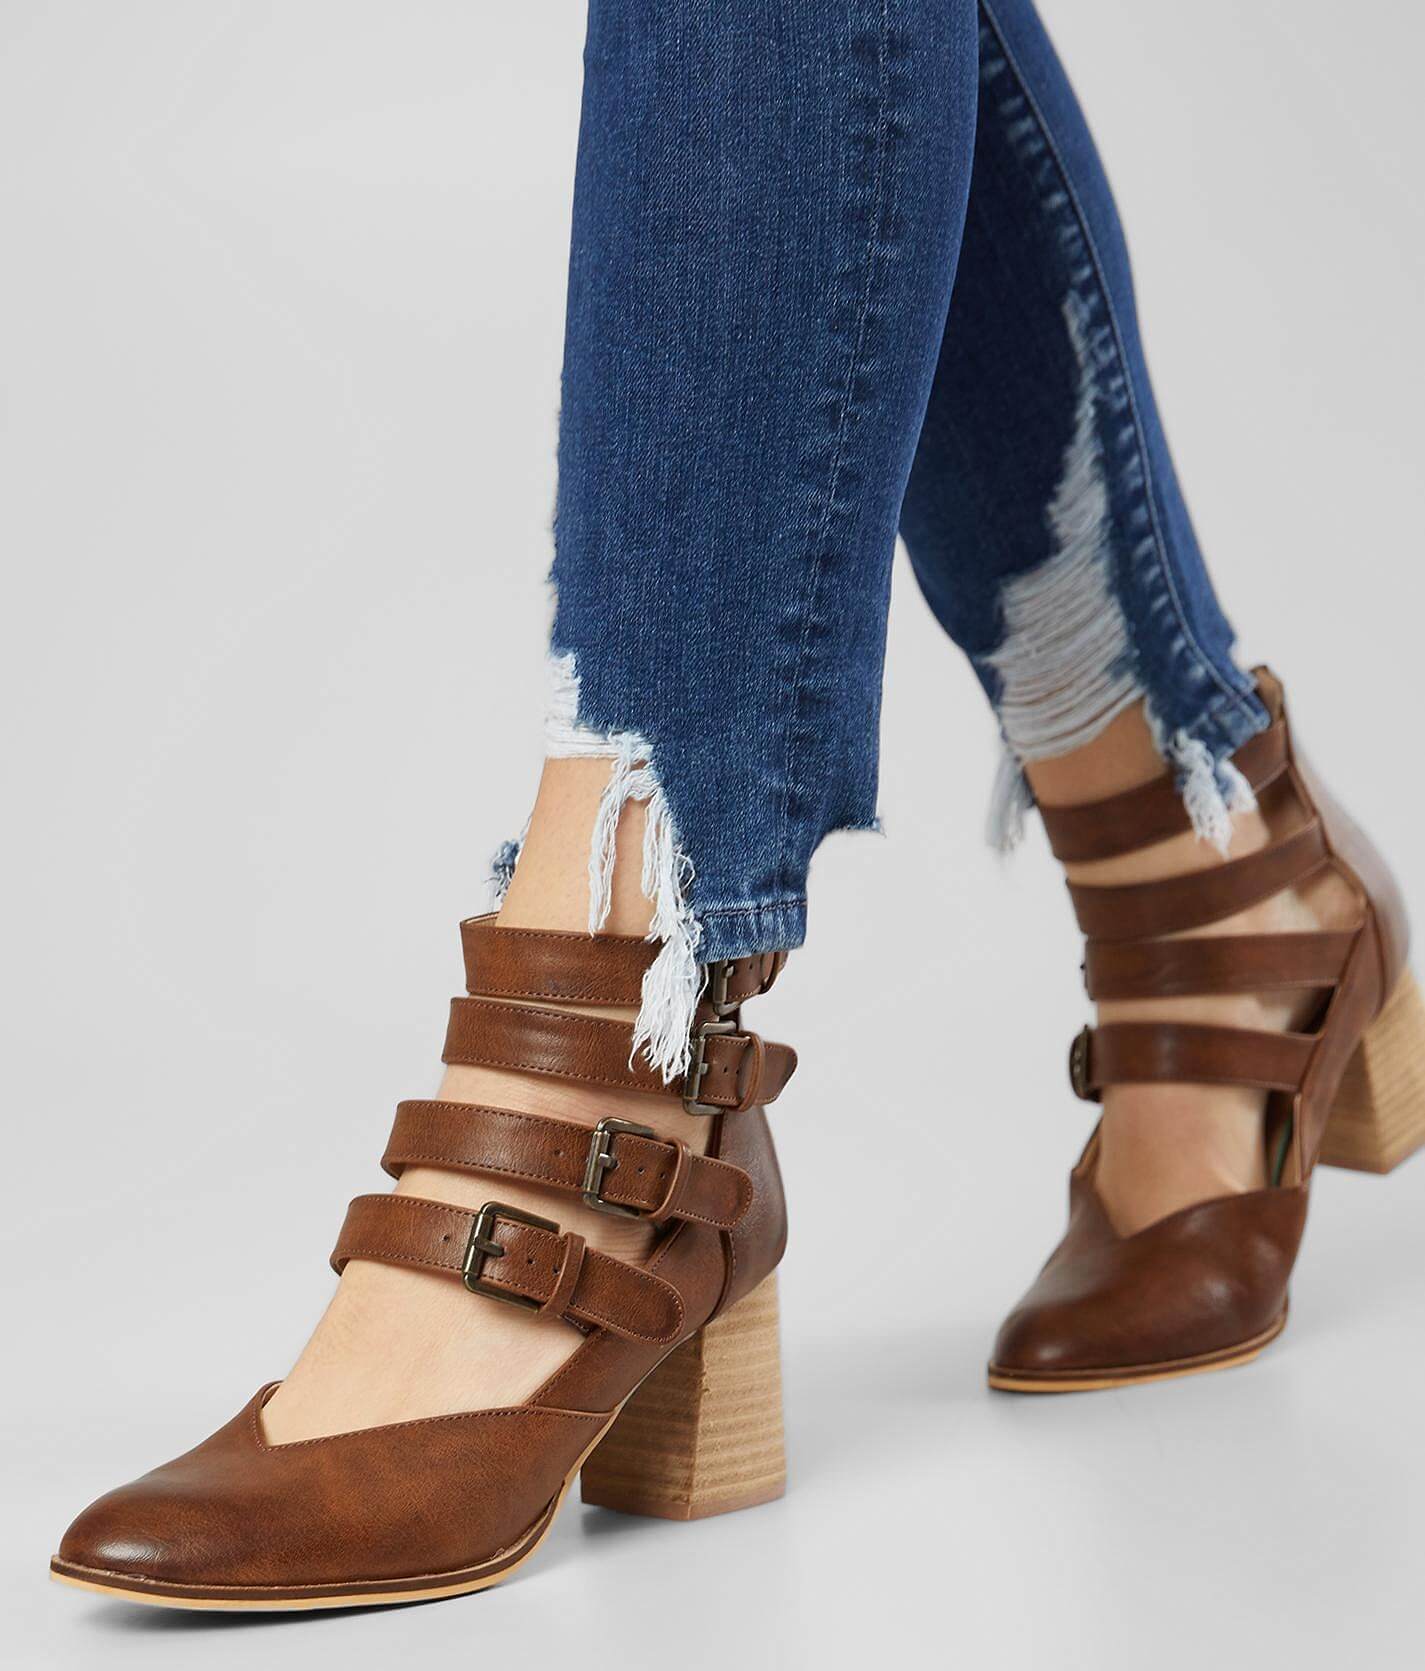 strappy boots women's shoes